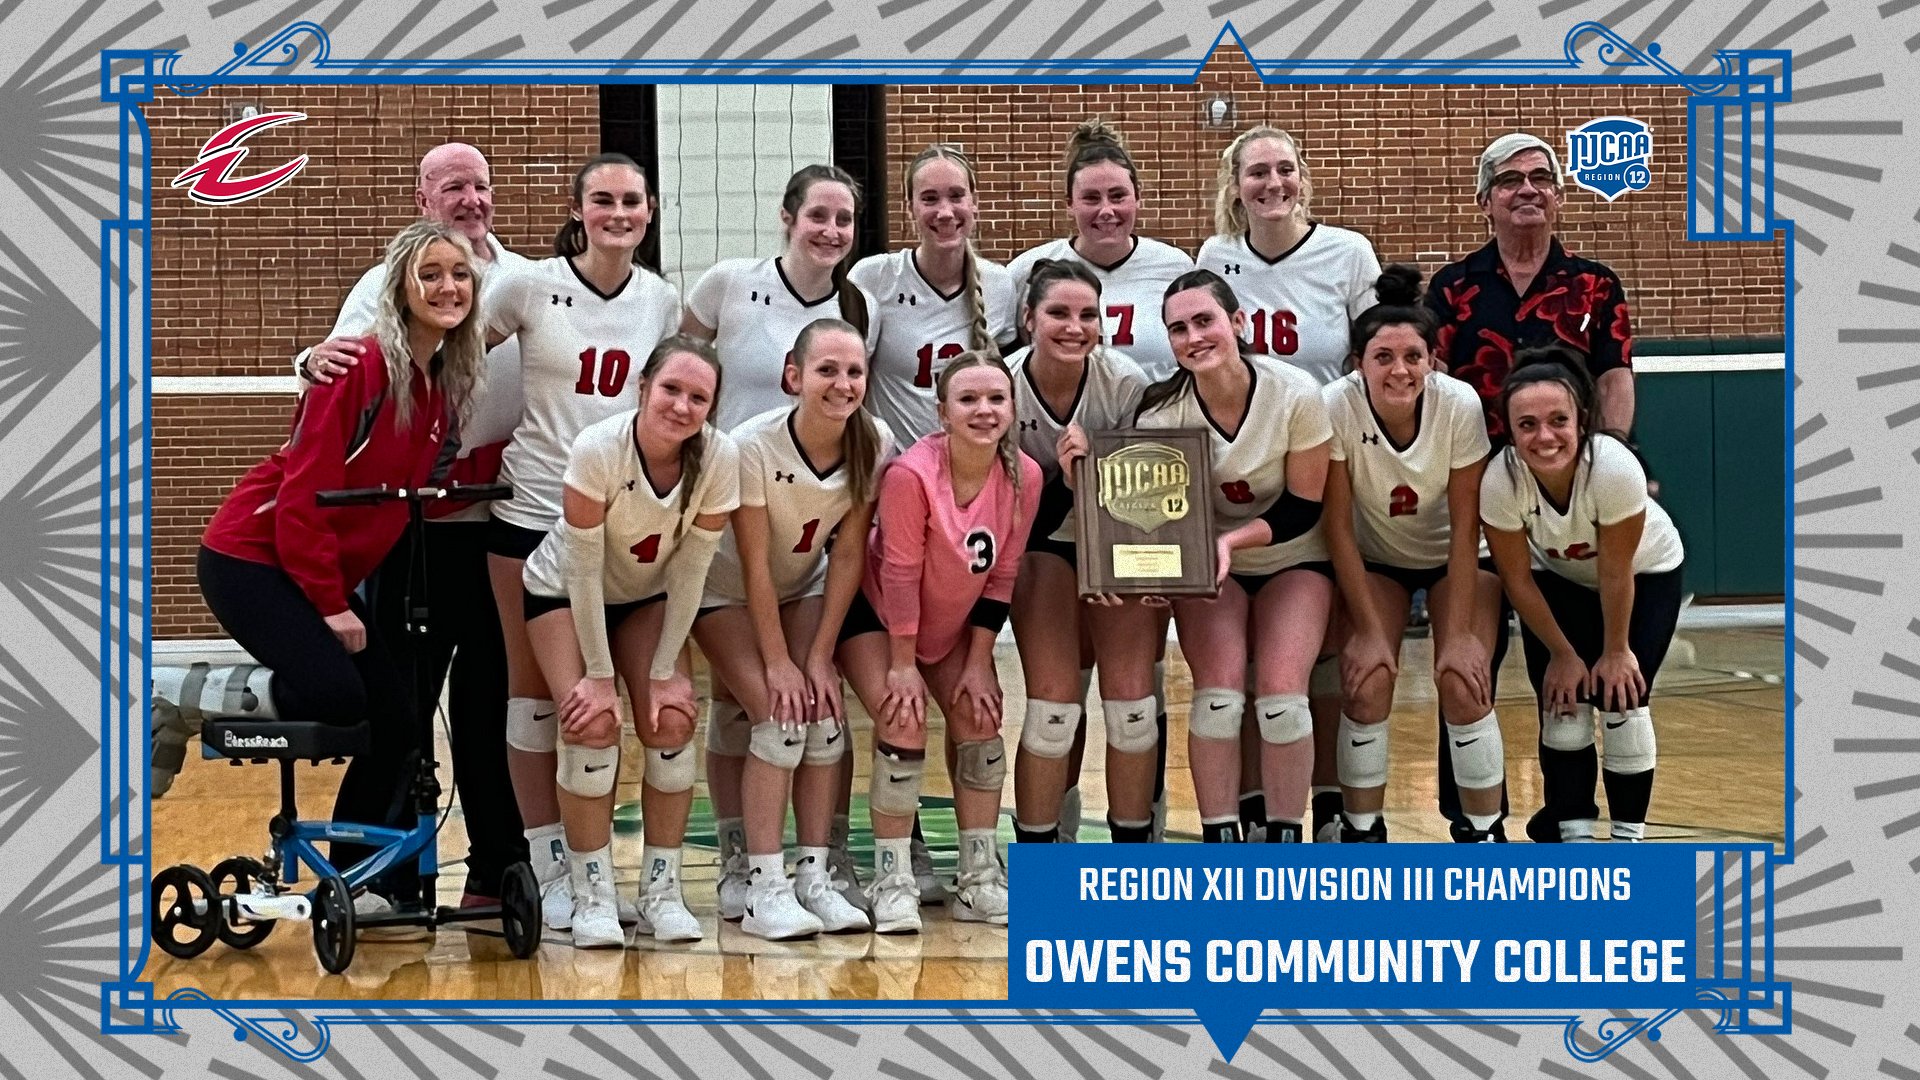 All Aboard! Owens Claims Region XII Division III Volleyball Championship